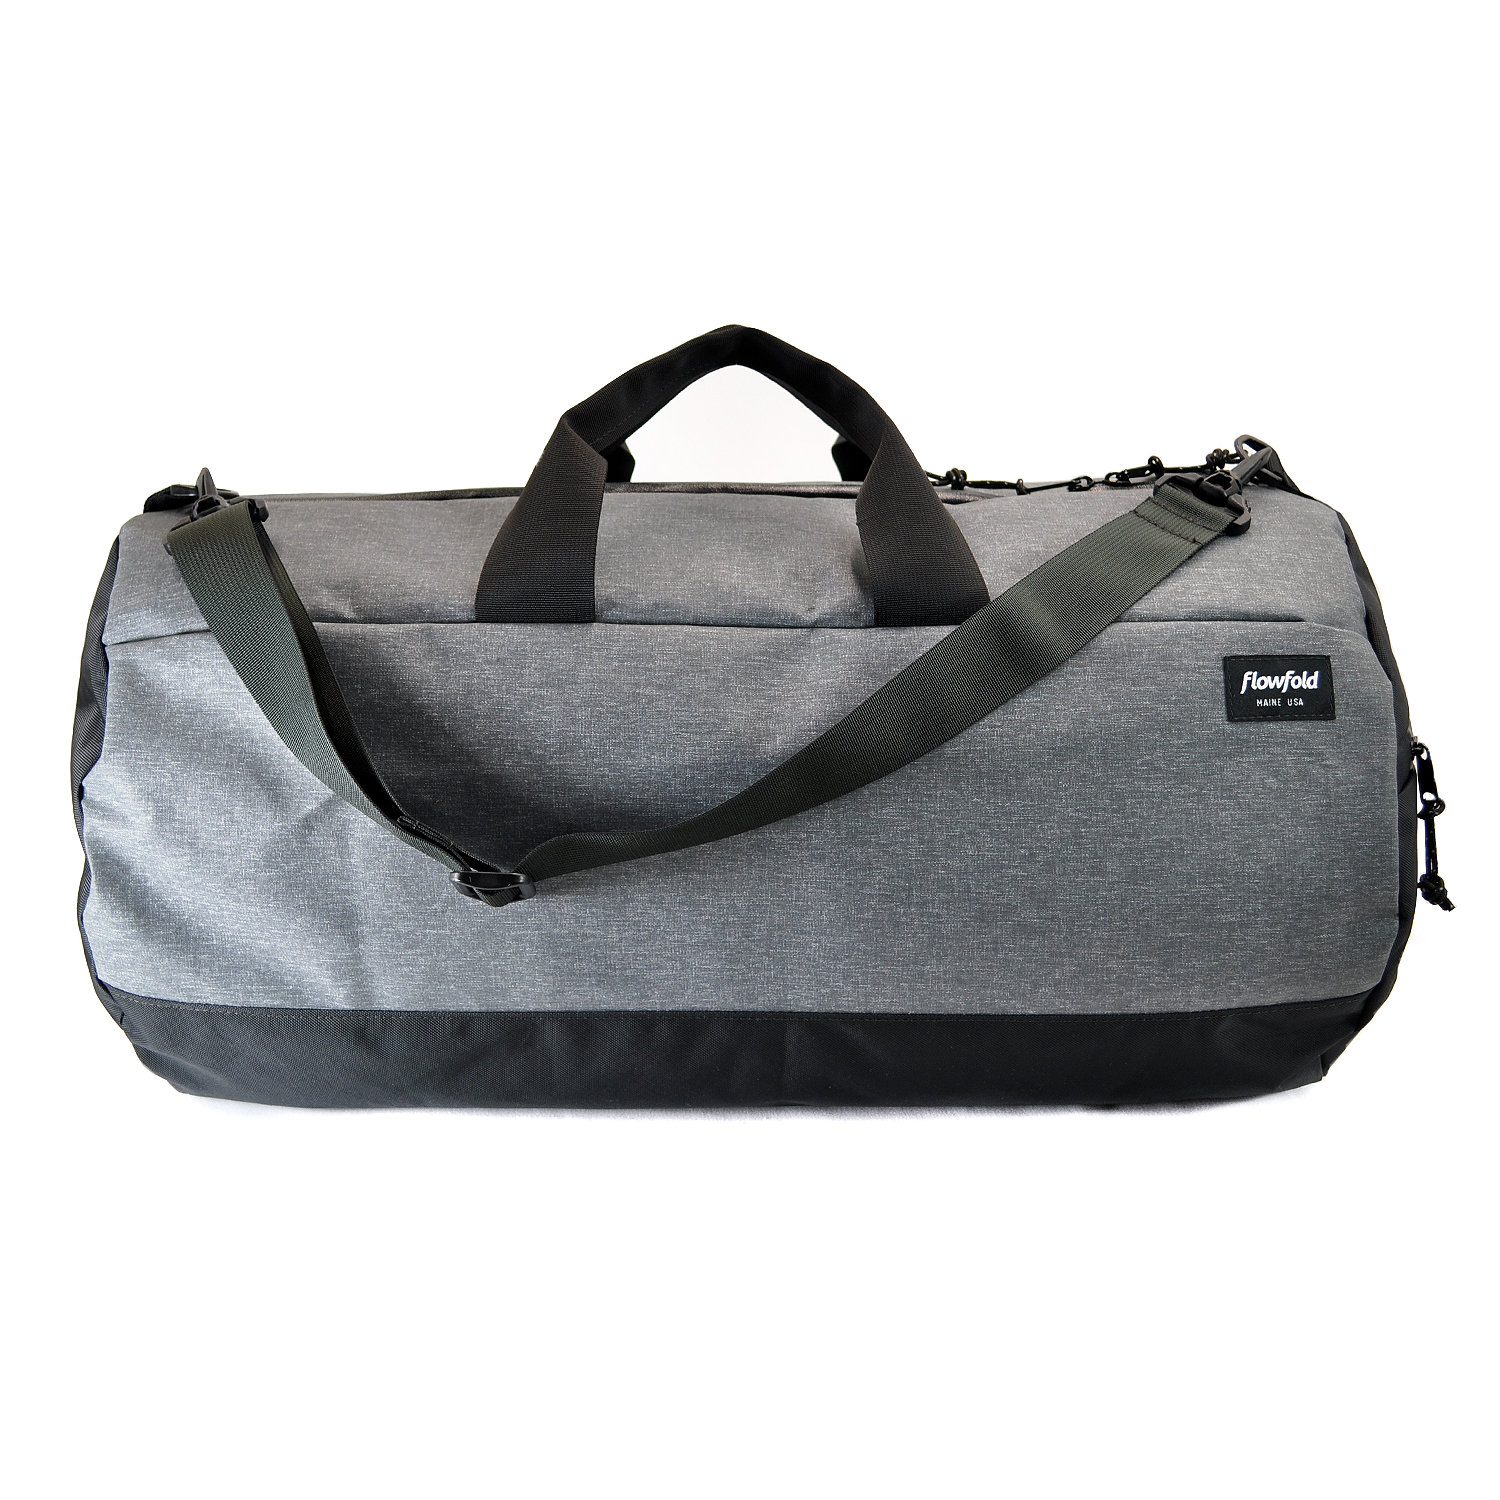 Flowfold Recycled Heather Grey Weather-Resistant Conductor Duffle bag for travel and road trips